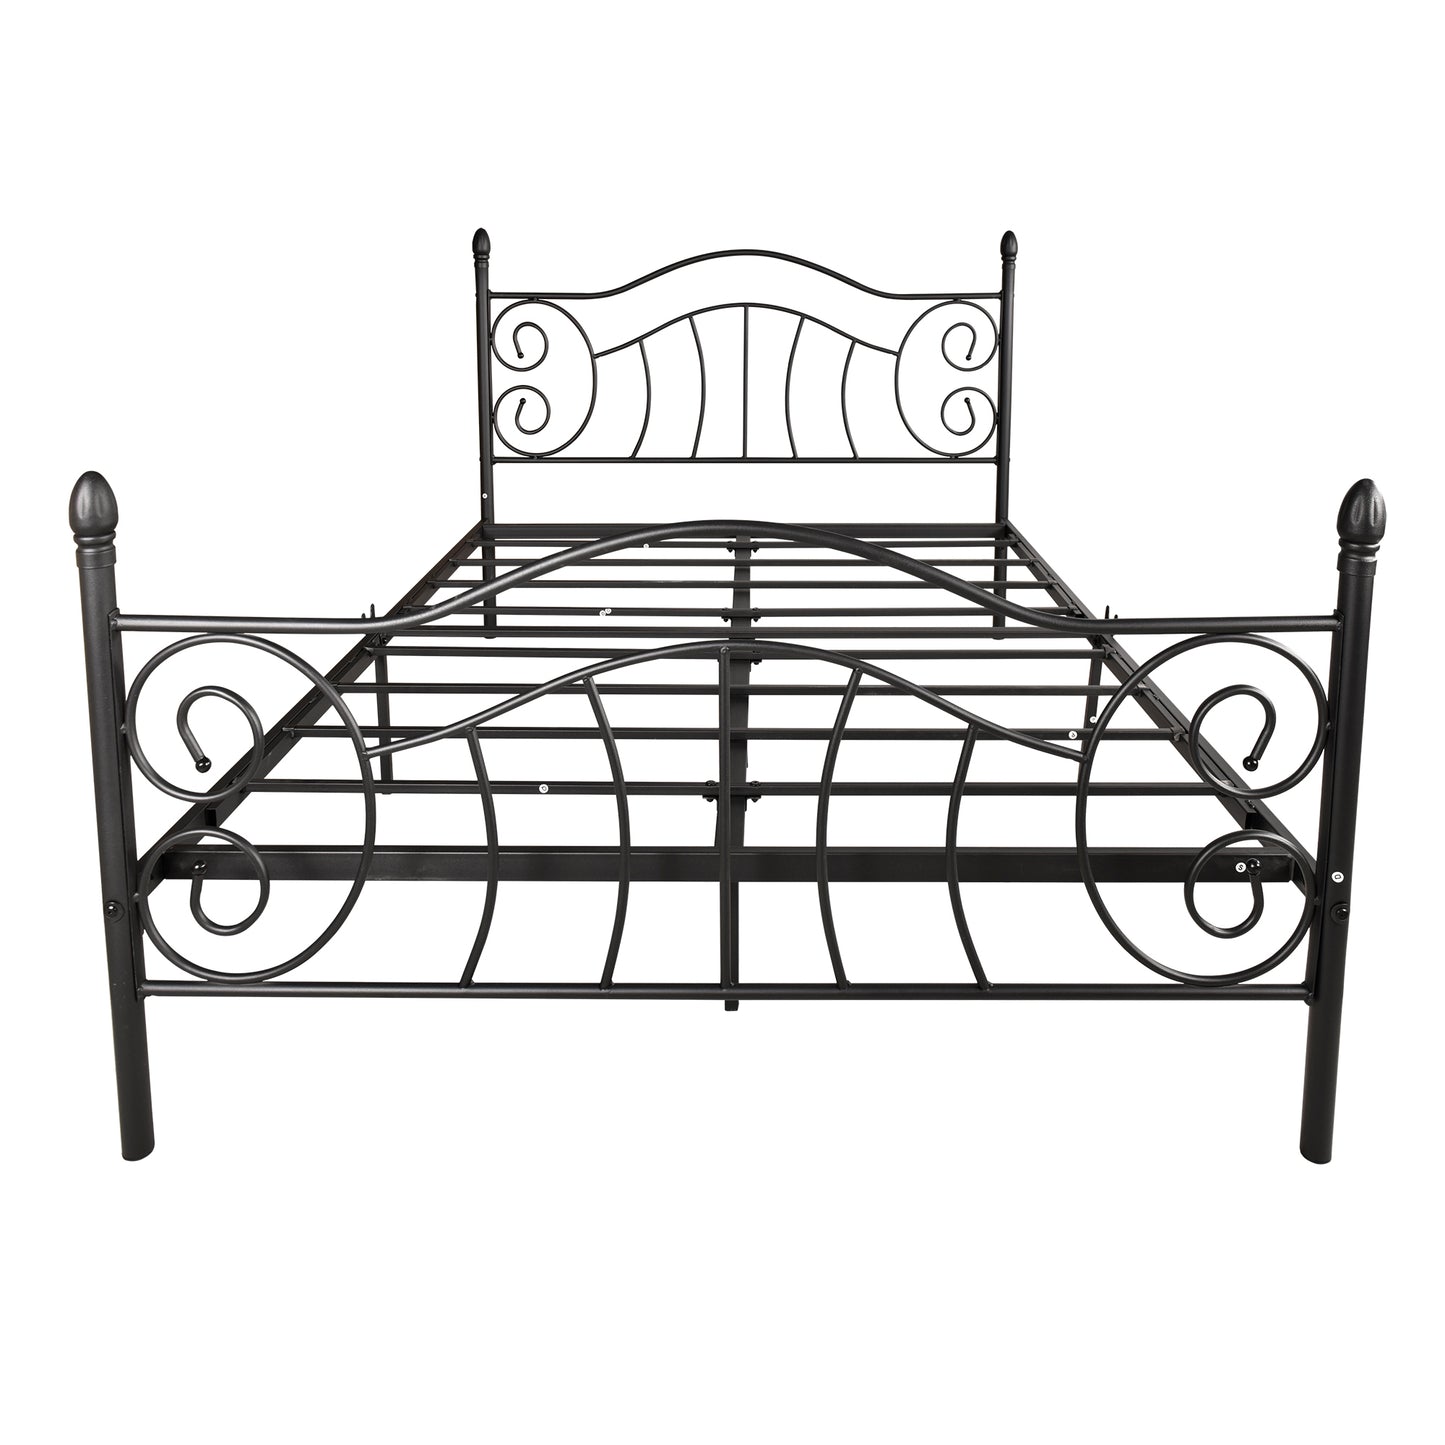 Queen Metal bed frame Sturdy Steel Slat Support with Under Bed Storage ,No Box Spring Needed, Black